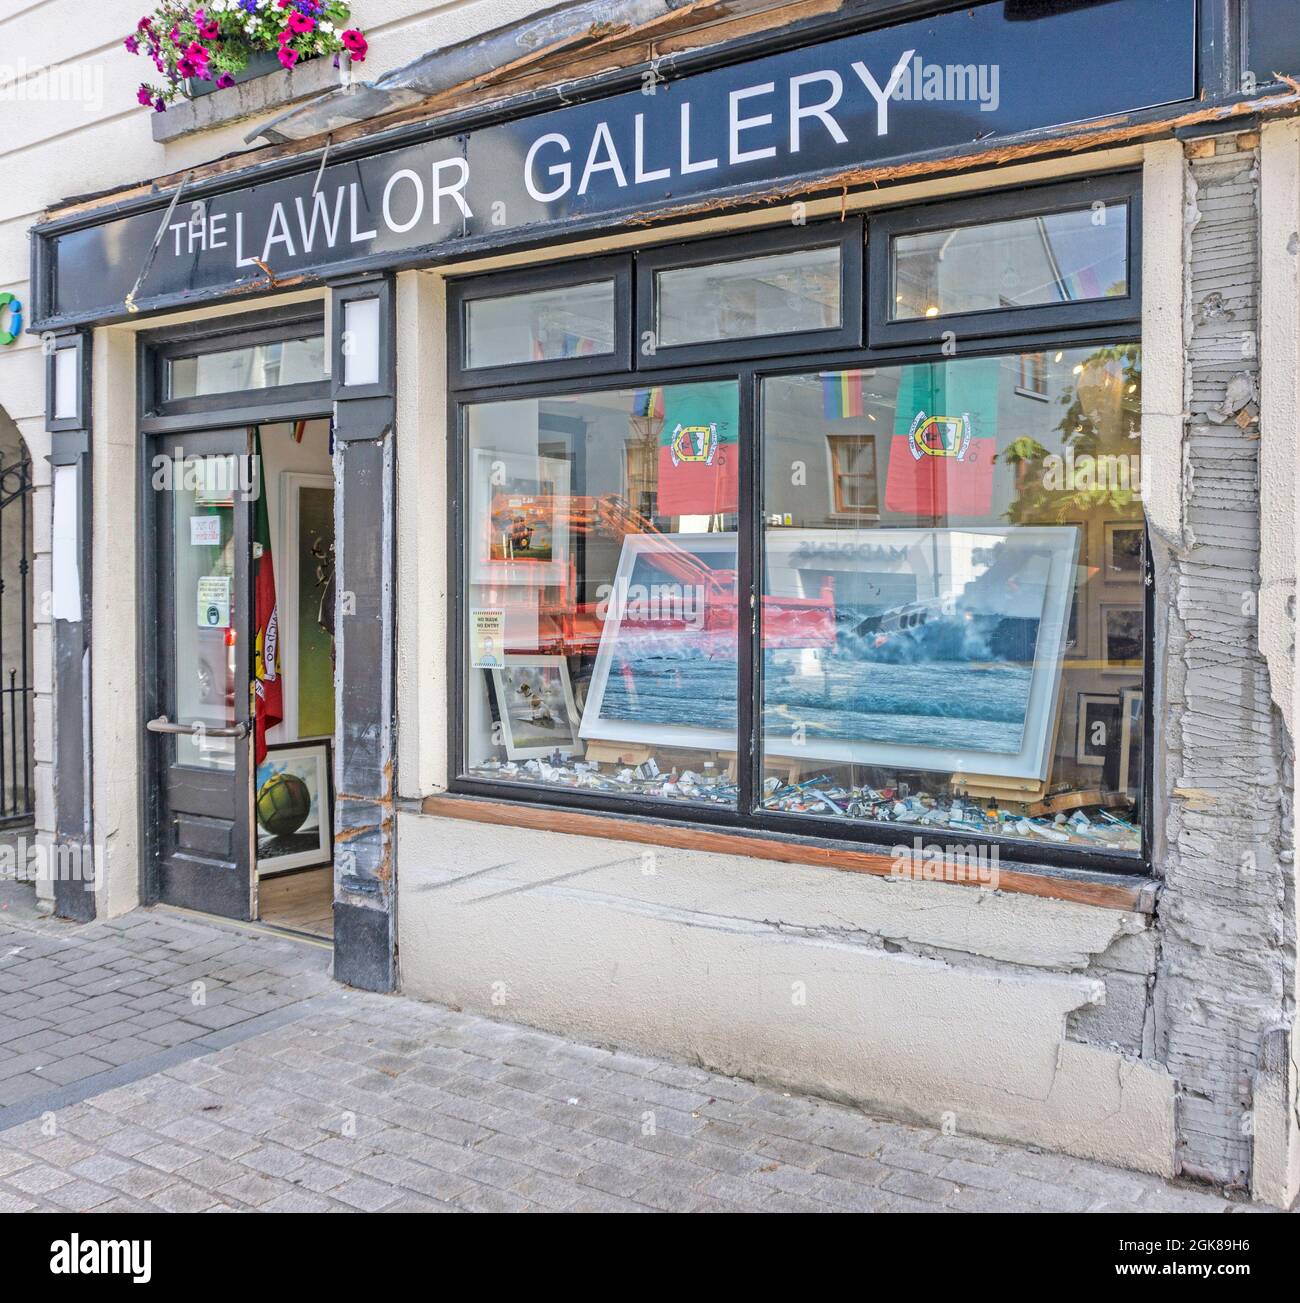 The Lawlor Gallery, art exhibition store and gallery, in Westport, County Mayo, Ireland. Stock Photo